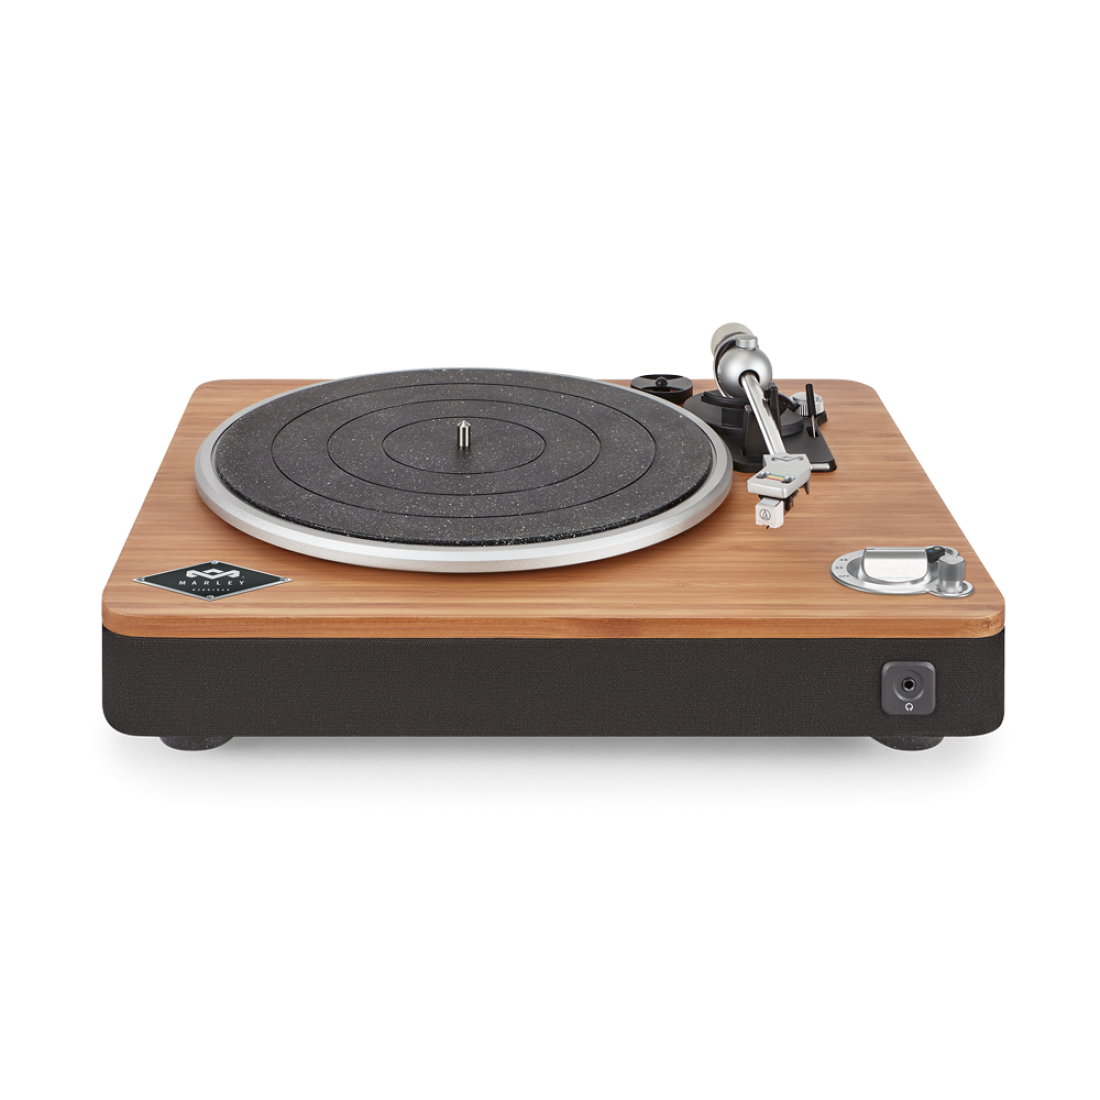 House of Marley Stir It Up Wireless turntable